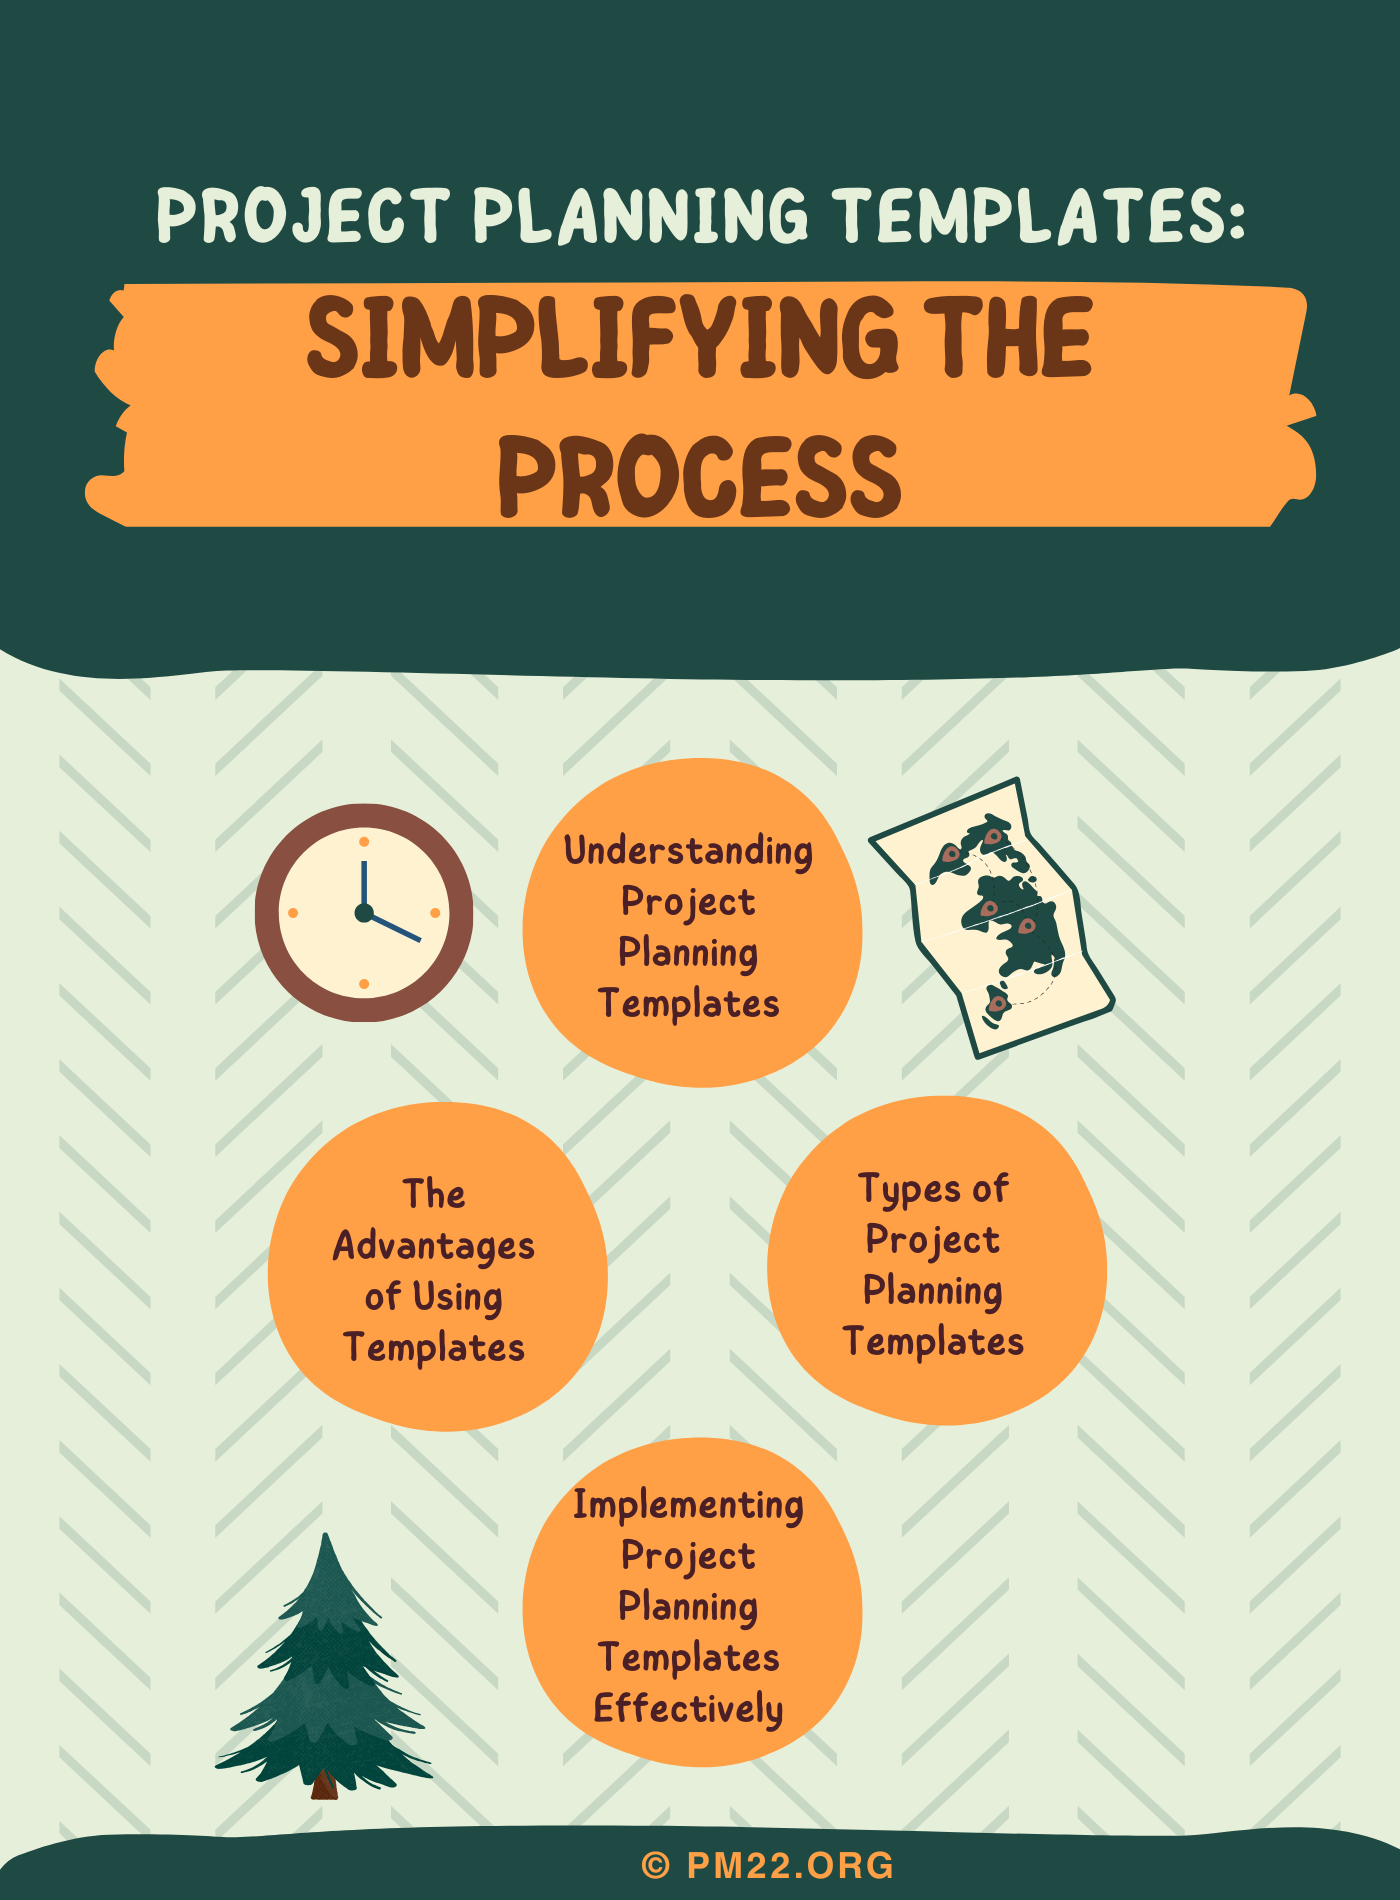 Project Planning Templates: Simplifying the Process